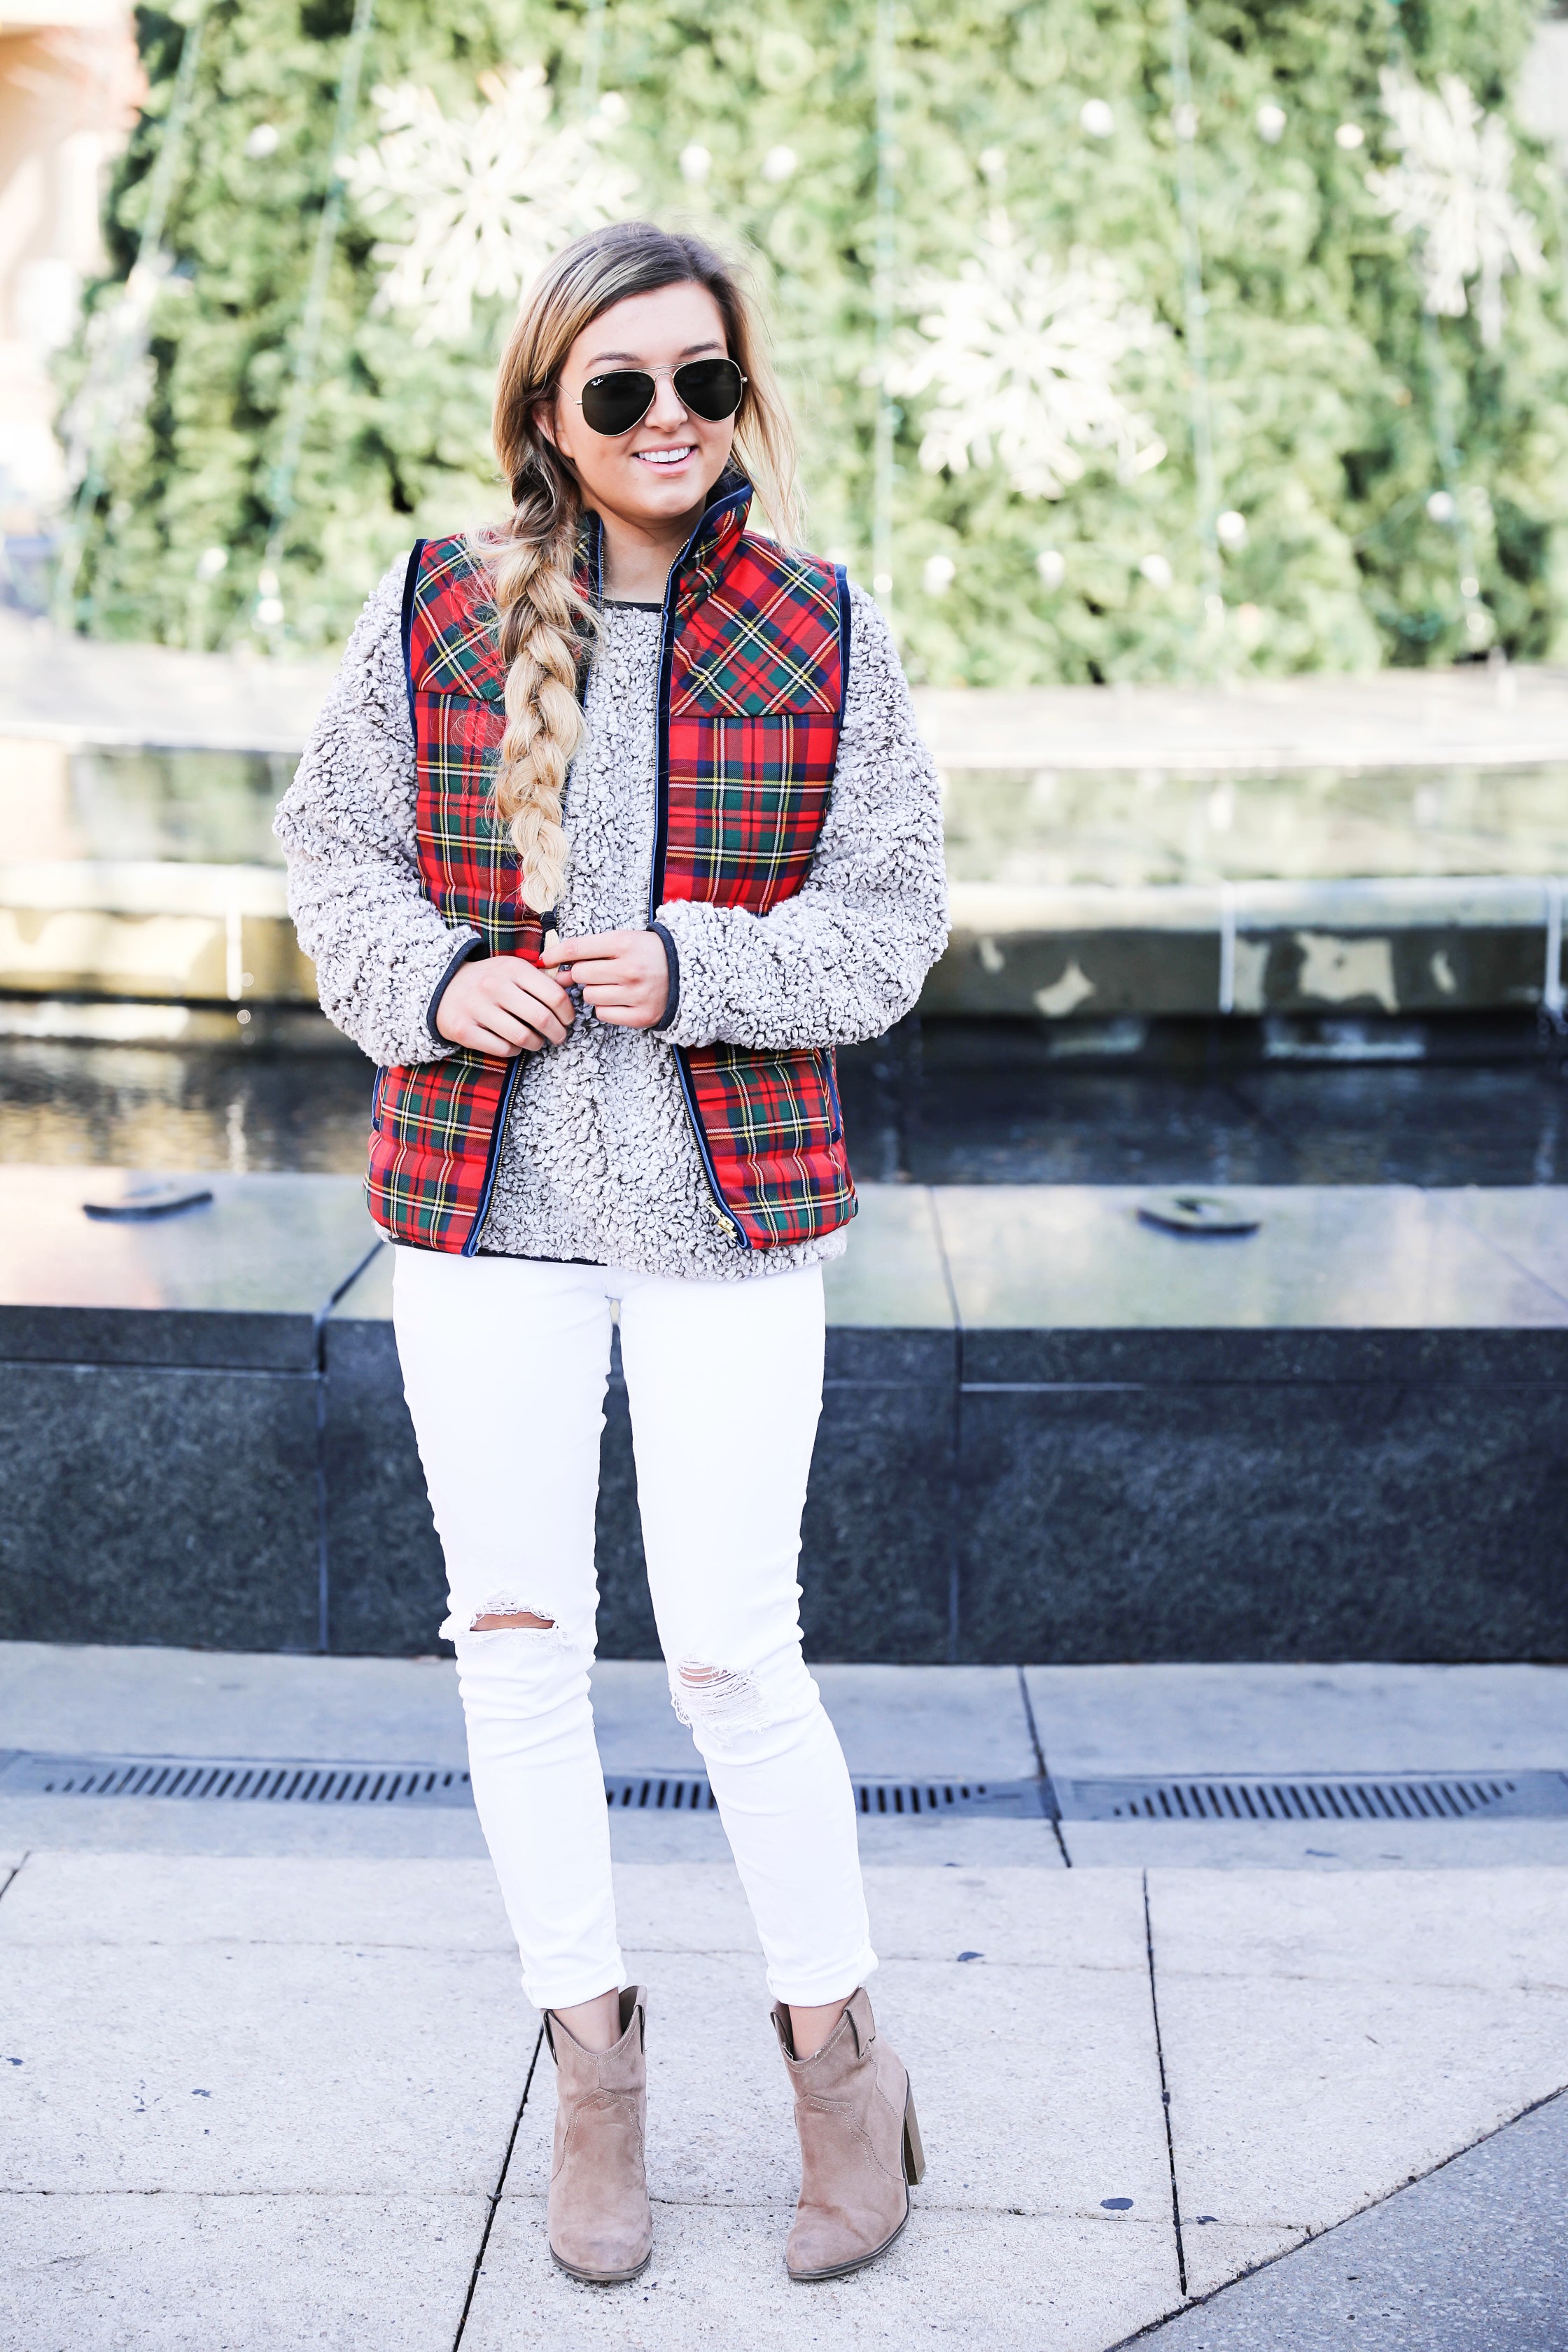 Tartan plaid j.crew vest with Dylan true grit comfy crewneck sweatshirt with white ripped jeans and side braid with long hair. Find the details for this winter outfit on fashion blog daily dose of charm by lauren Lindmark 